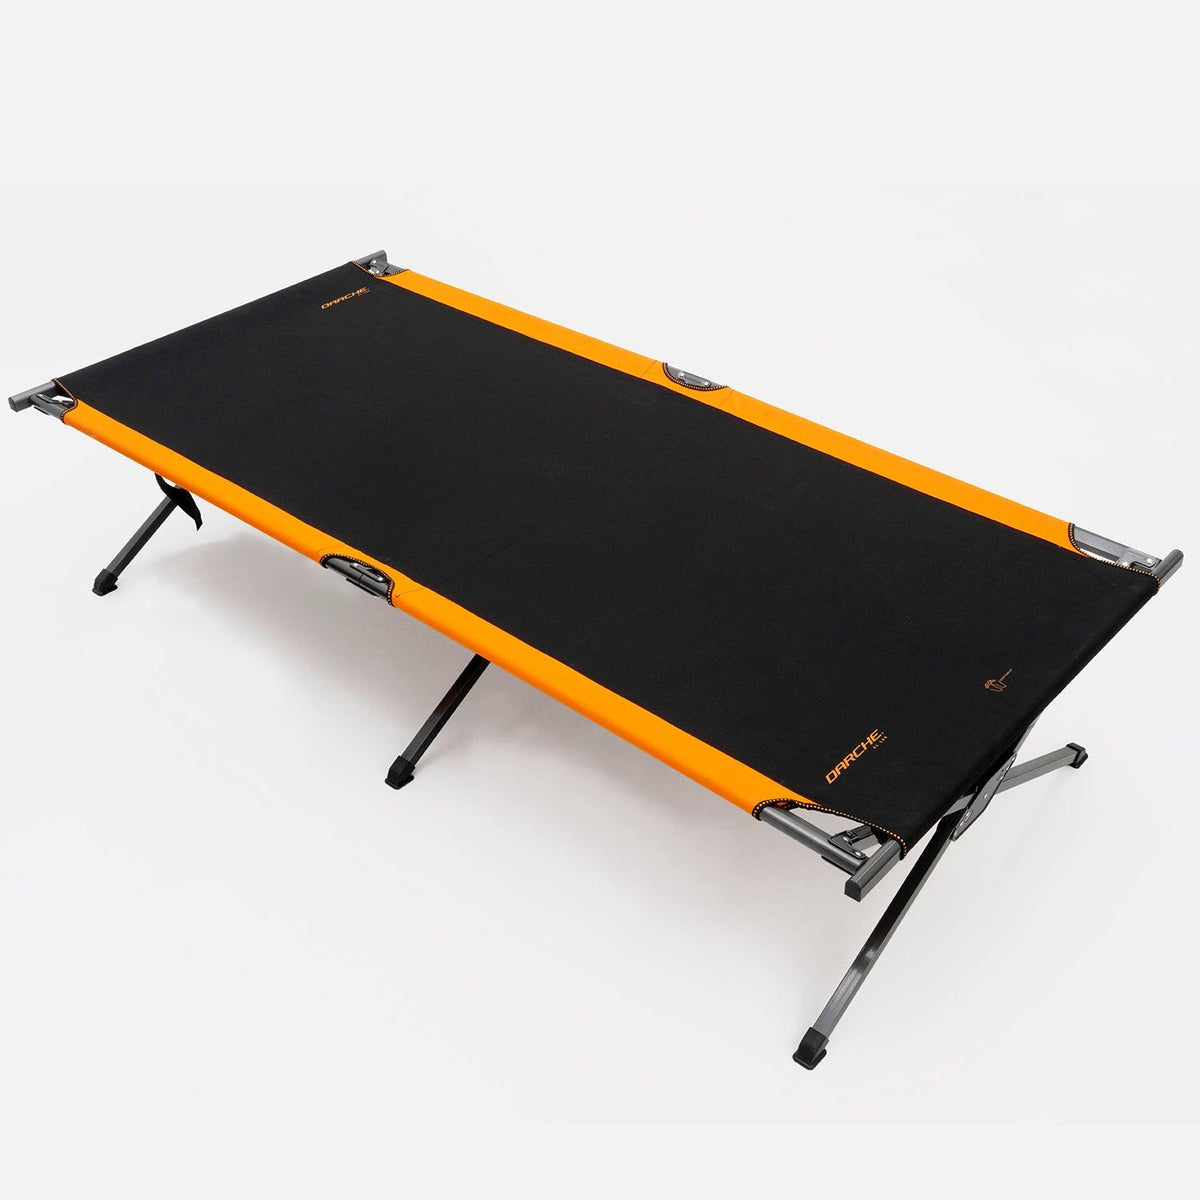 XL100 Stretcher  Cots Darche- Overland Kitted